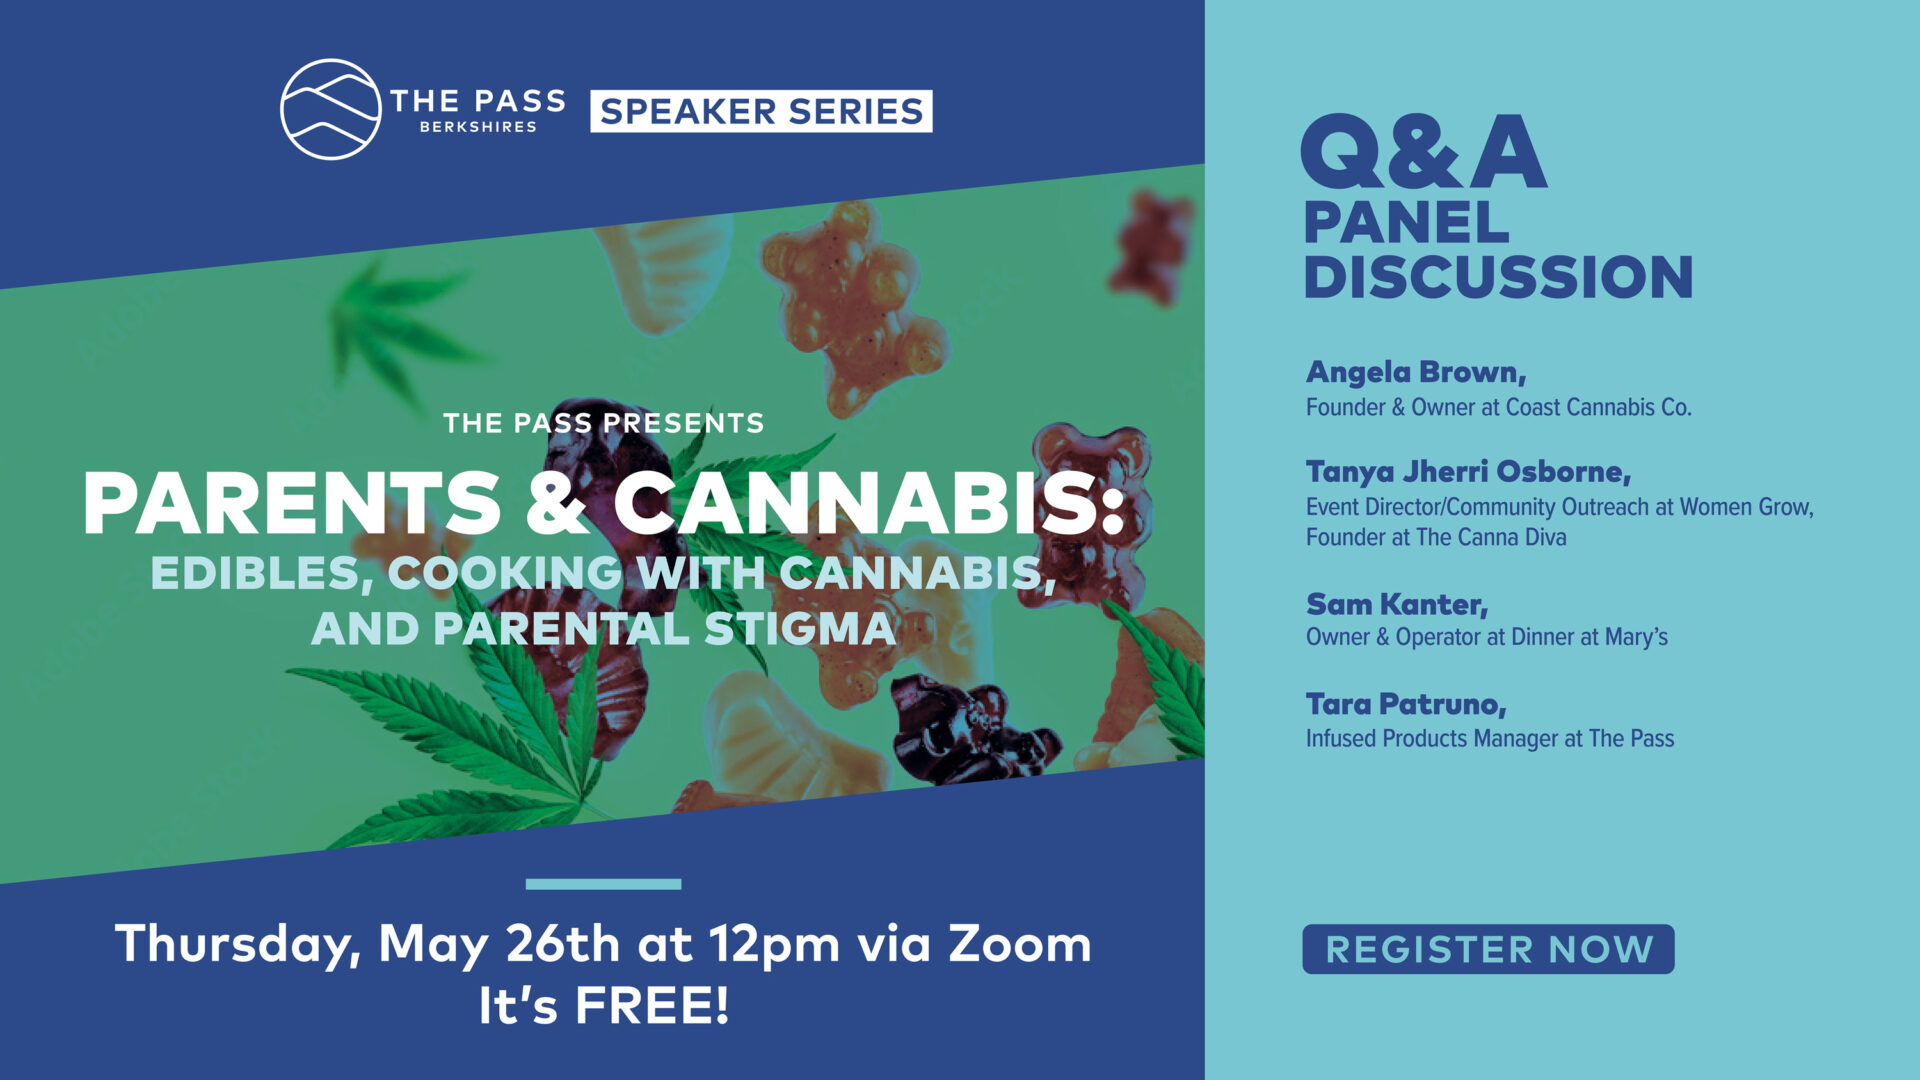 ThePass_SpeakerSeries_May2022_Parents_and_Cannabis